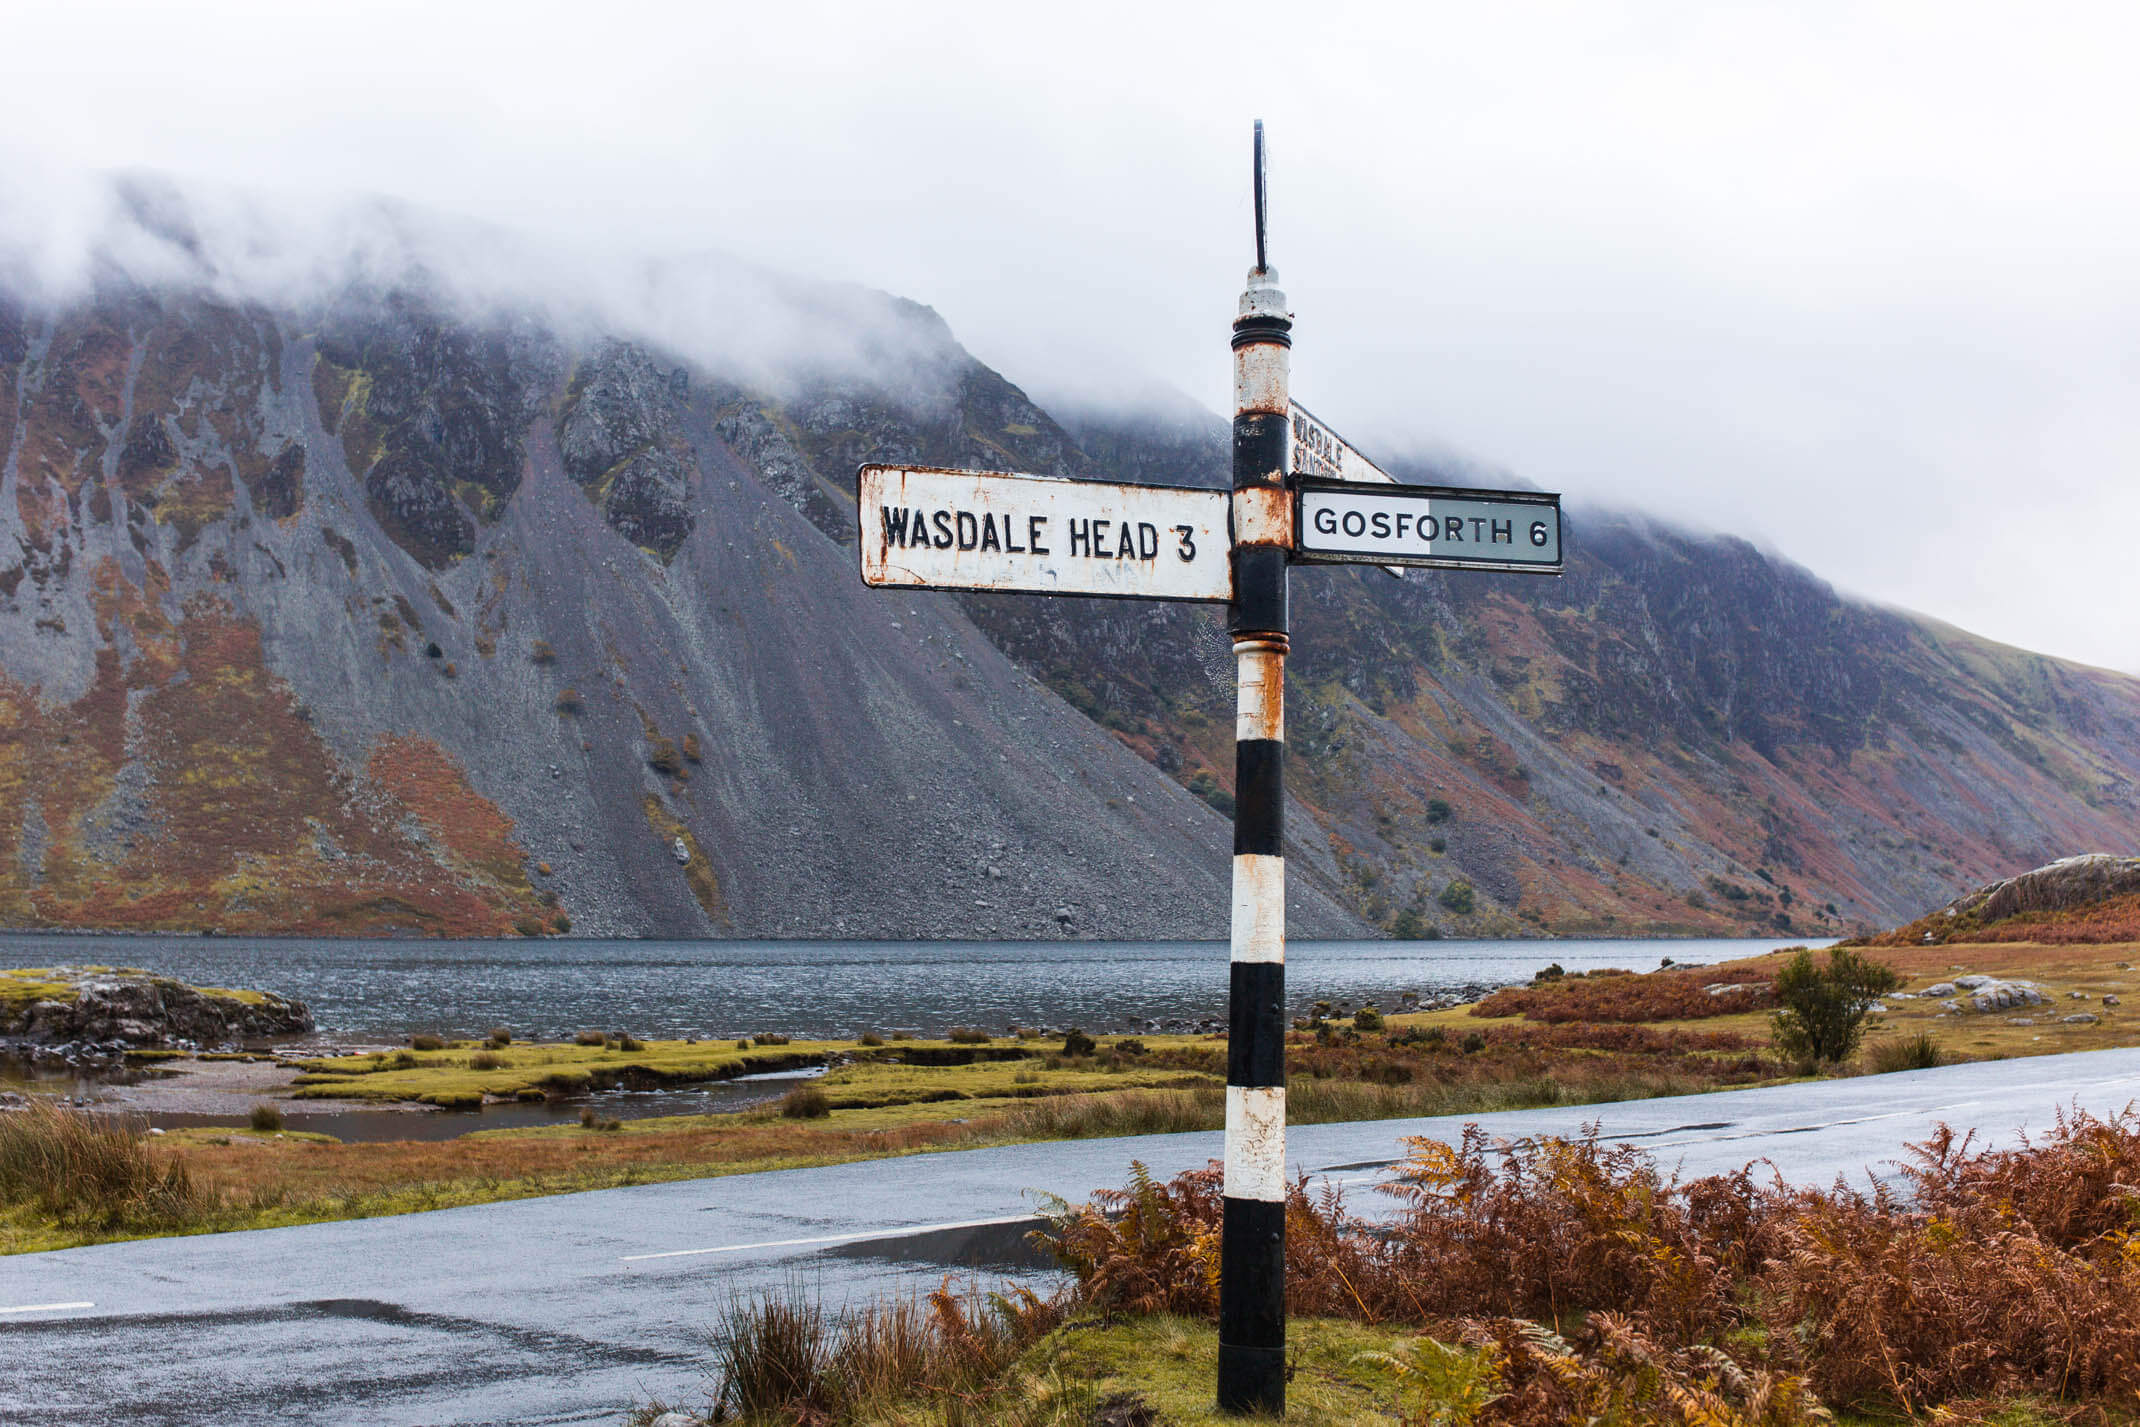 Scafell Pike: A guide to climbing England's highest peak